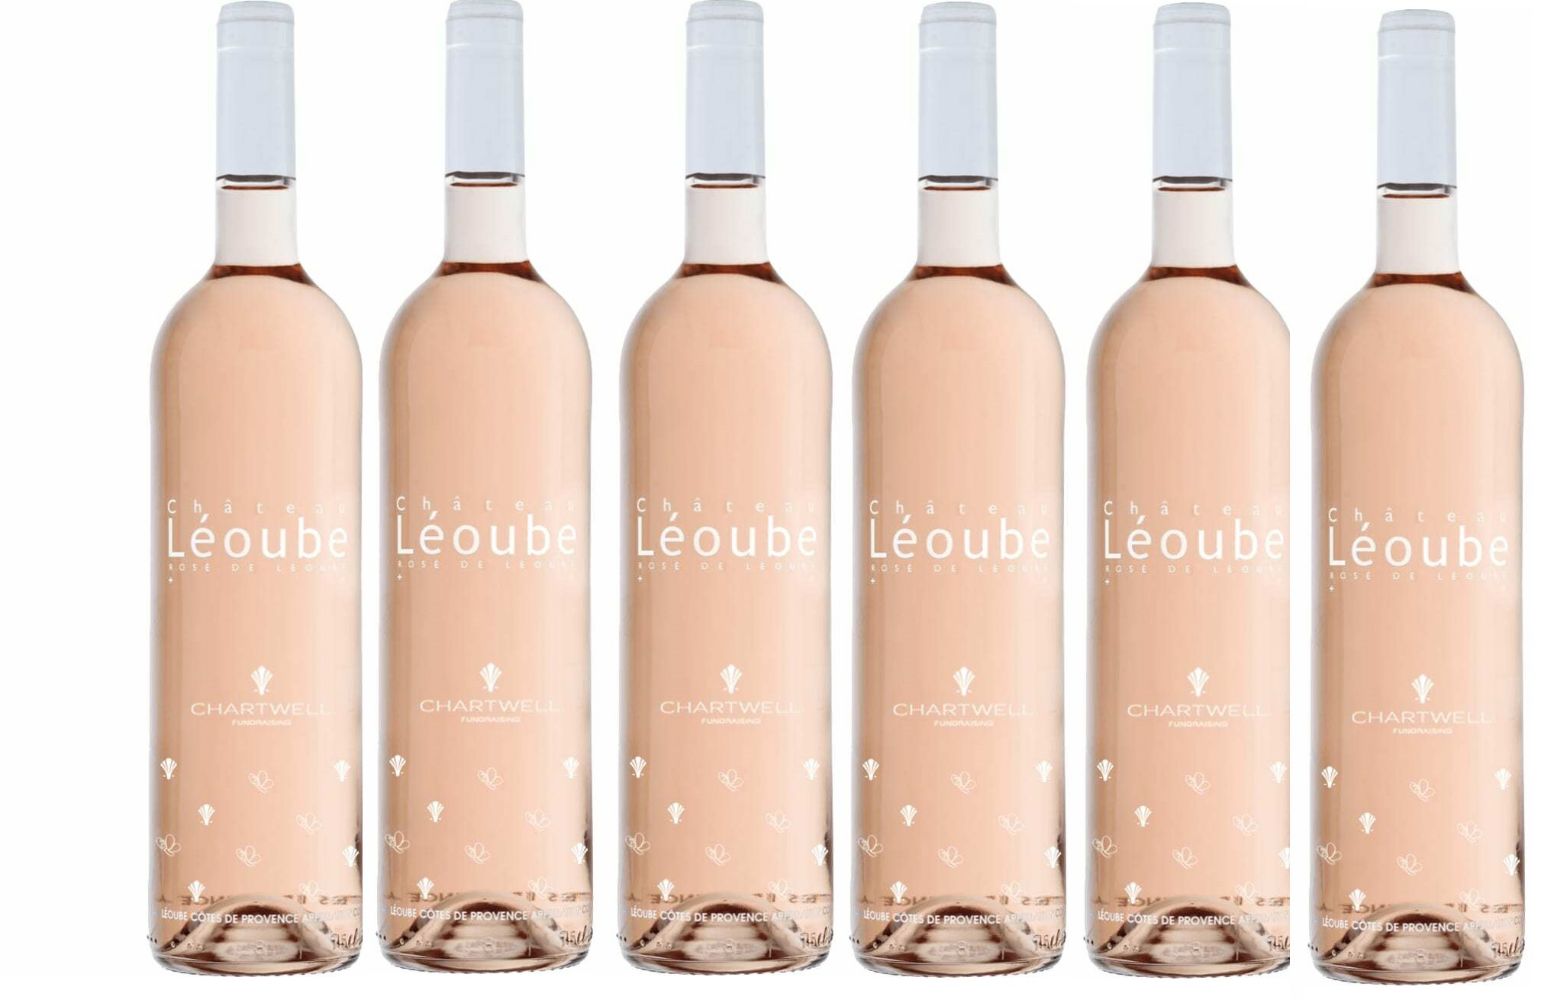 CHARITY AUCTION - Superb Special Edition Rosé de Léoube 2020 - Sold By The Case On Behalf of Caudwell Children